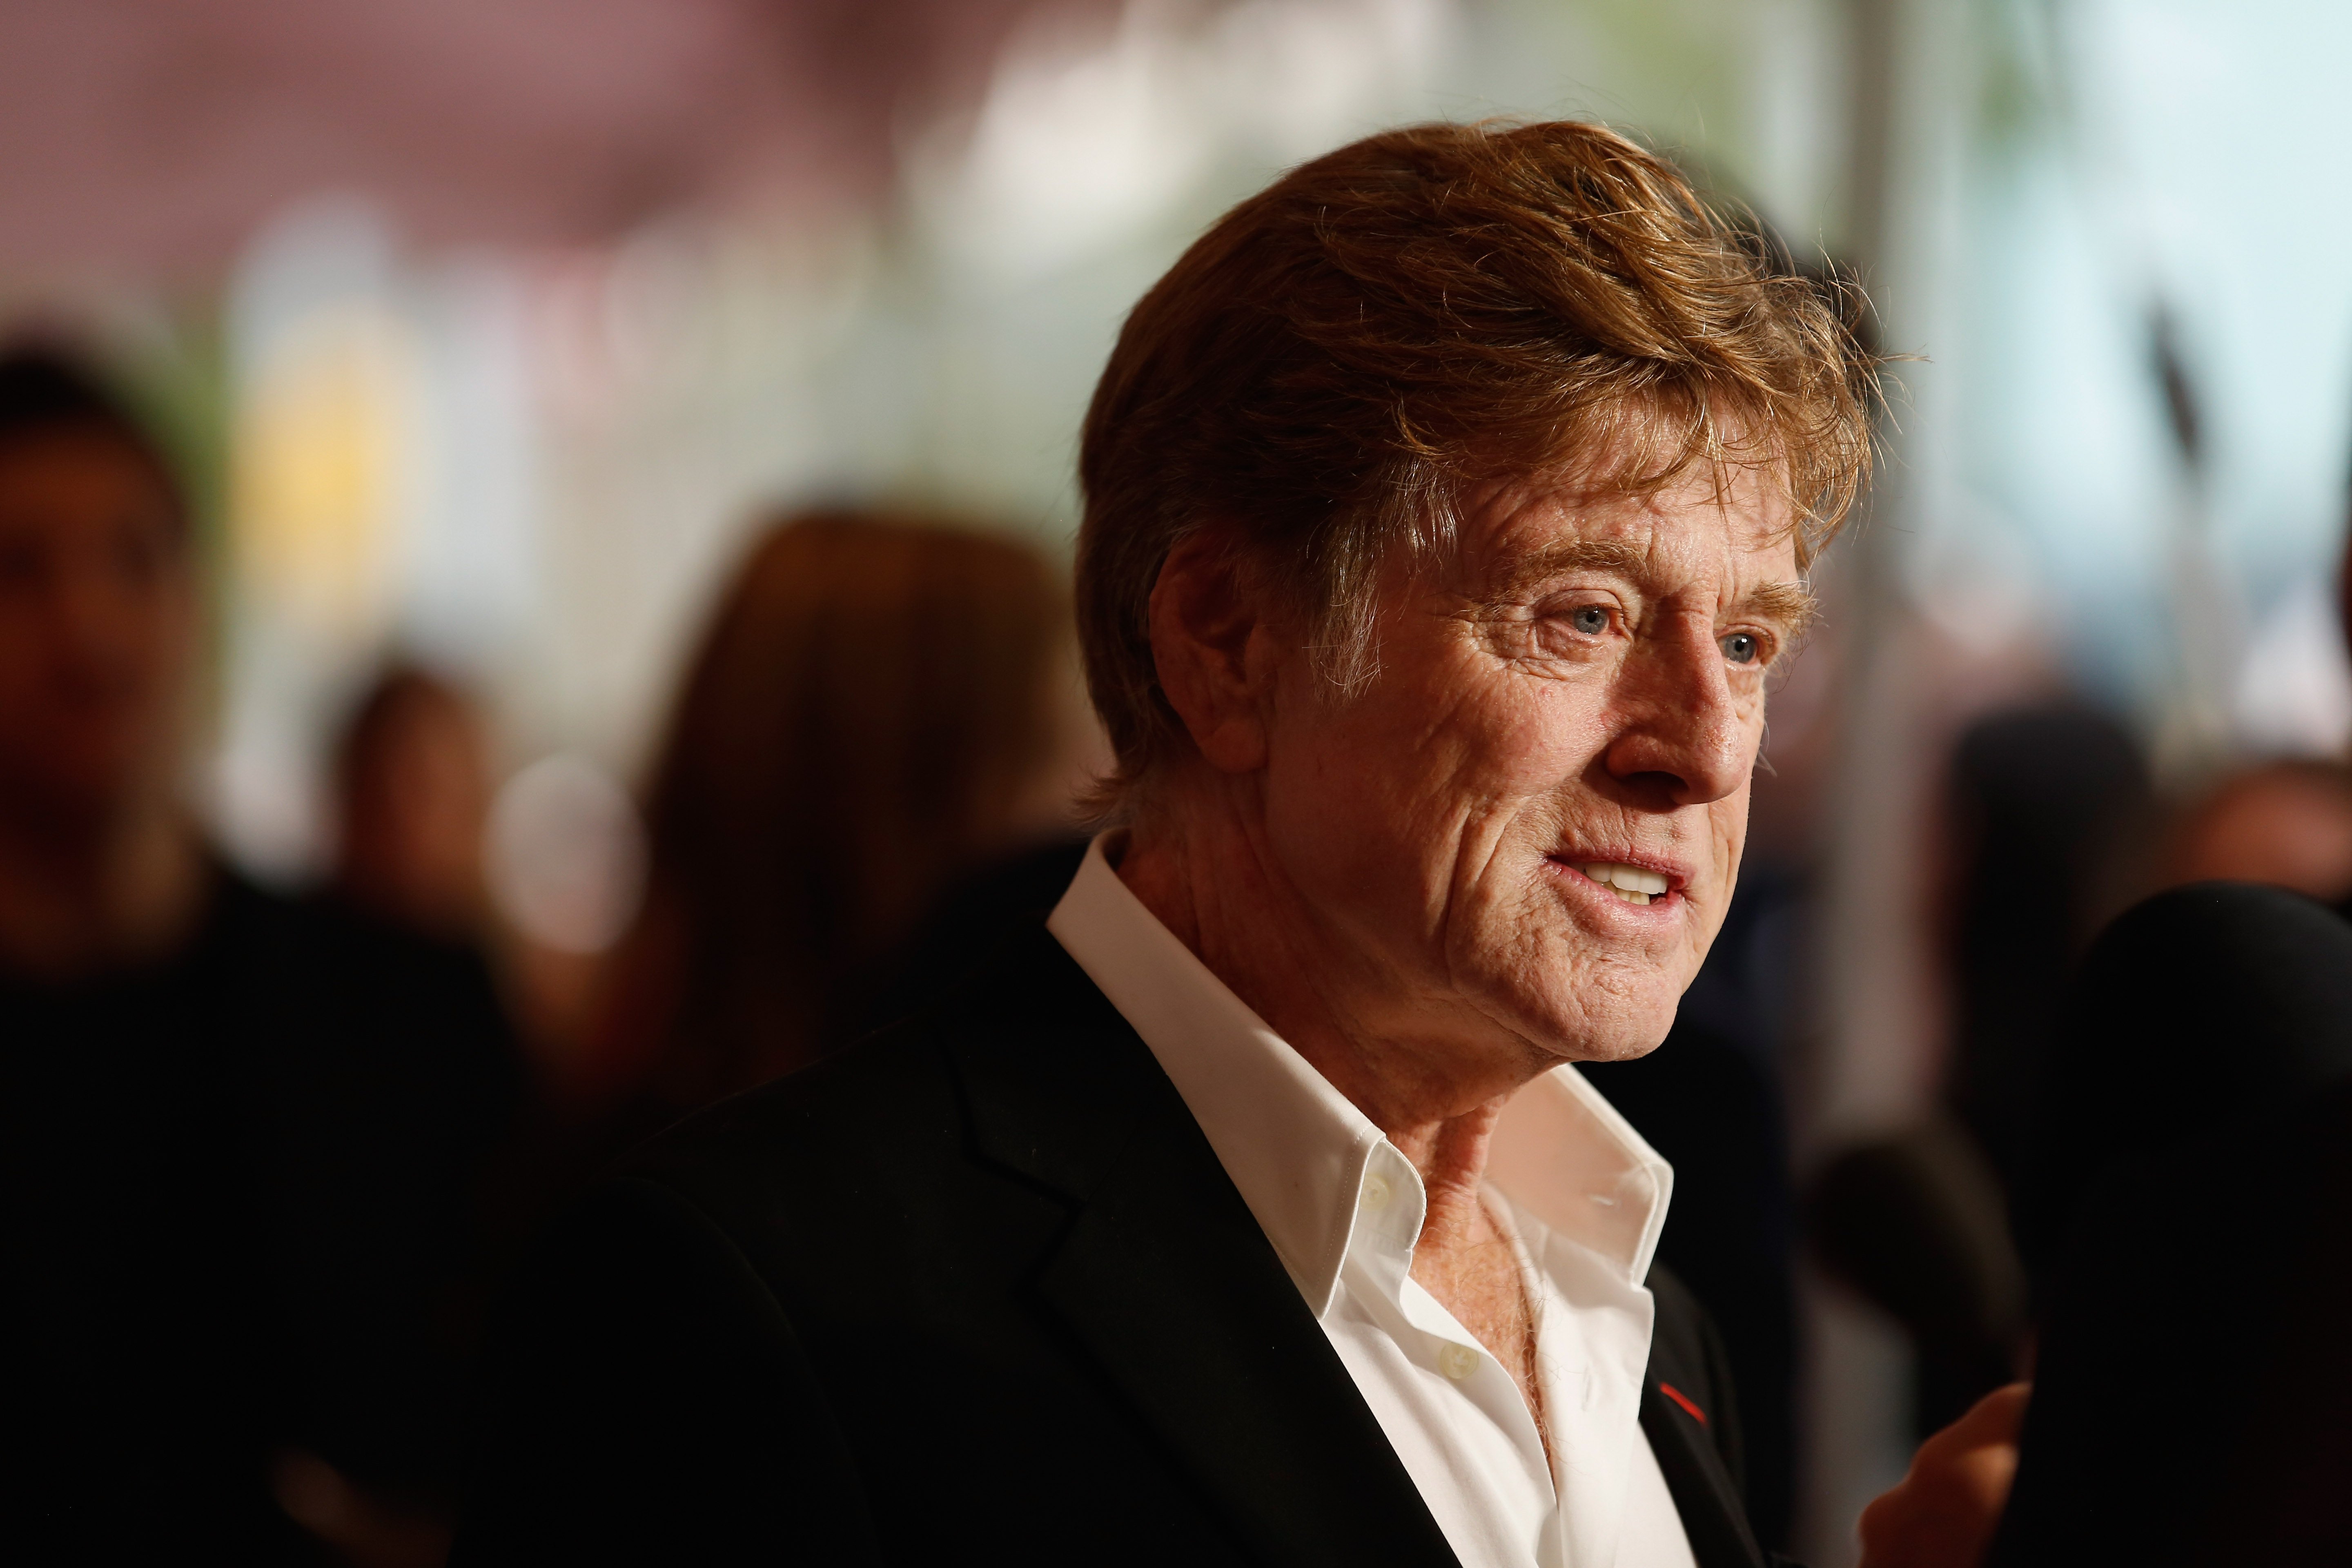 Robert Redford at the "All Is Lost" premiere during the 51st New York Film Festiva on October 8, 2013 | Photo: GettyImages